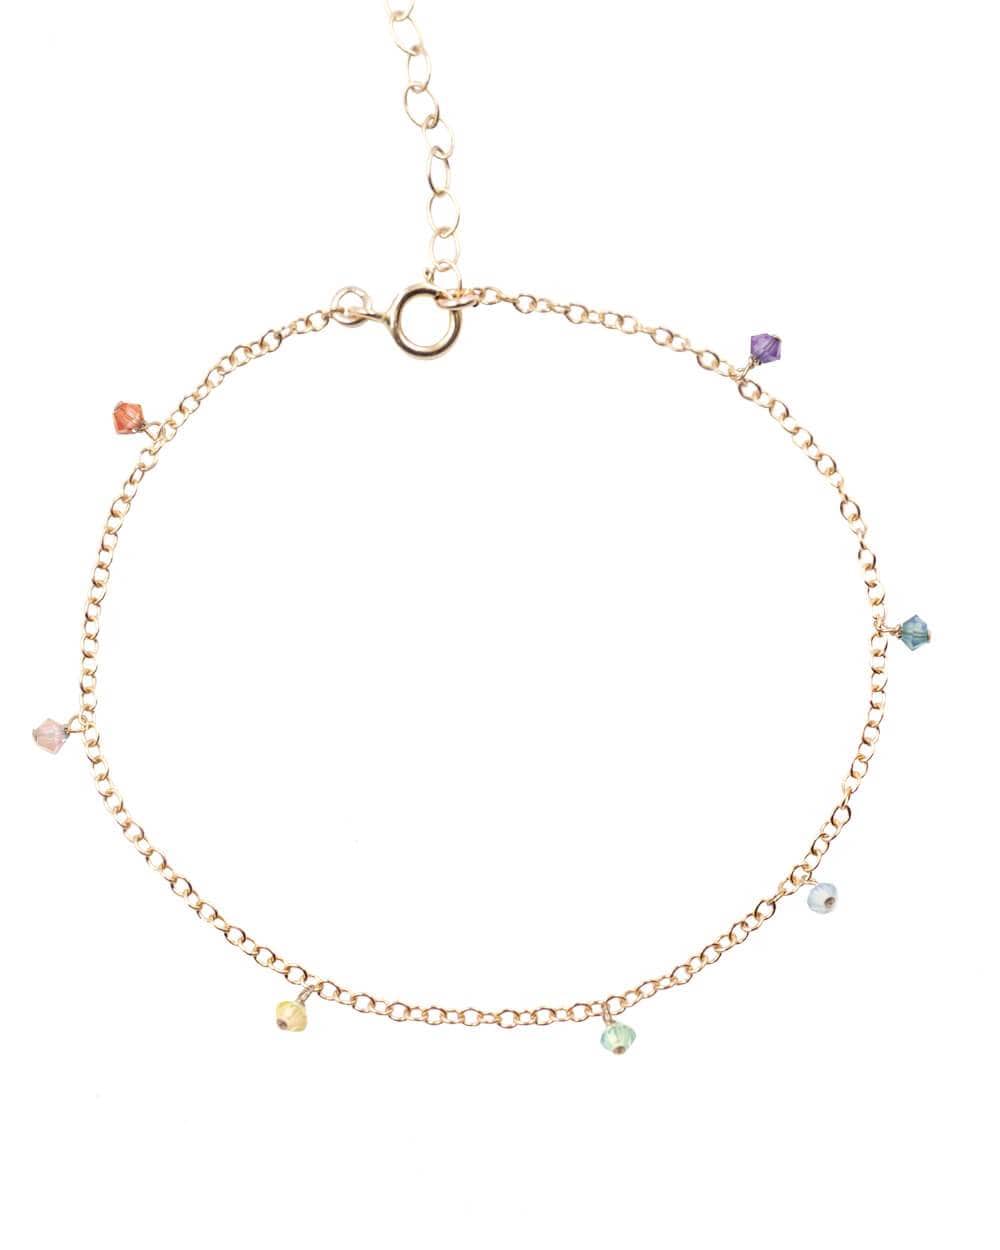 The 7 Chakras Anklet with Swarovski Crystals Dainty Anklets 14k Gold Filled / 9-10" (small - standard) MaeMae Jewelry | Multi Color Swarovski Crystals | The 7 Chakras Anklet